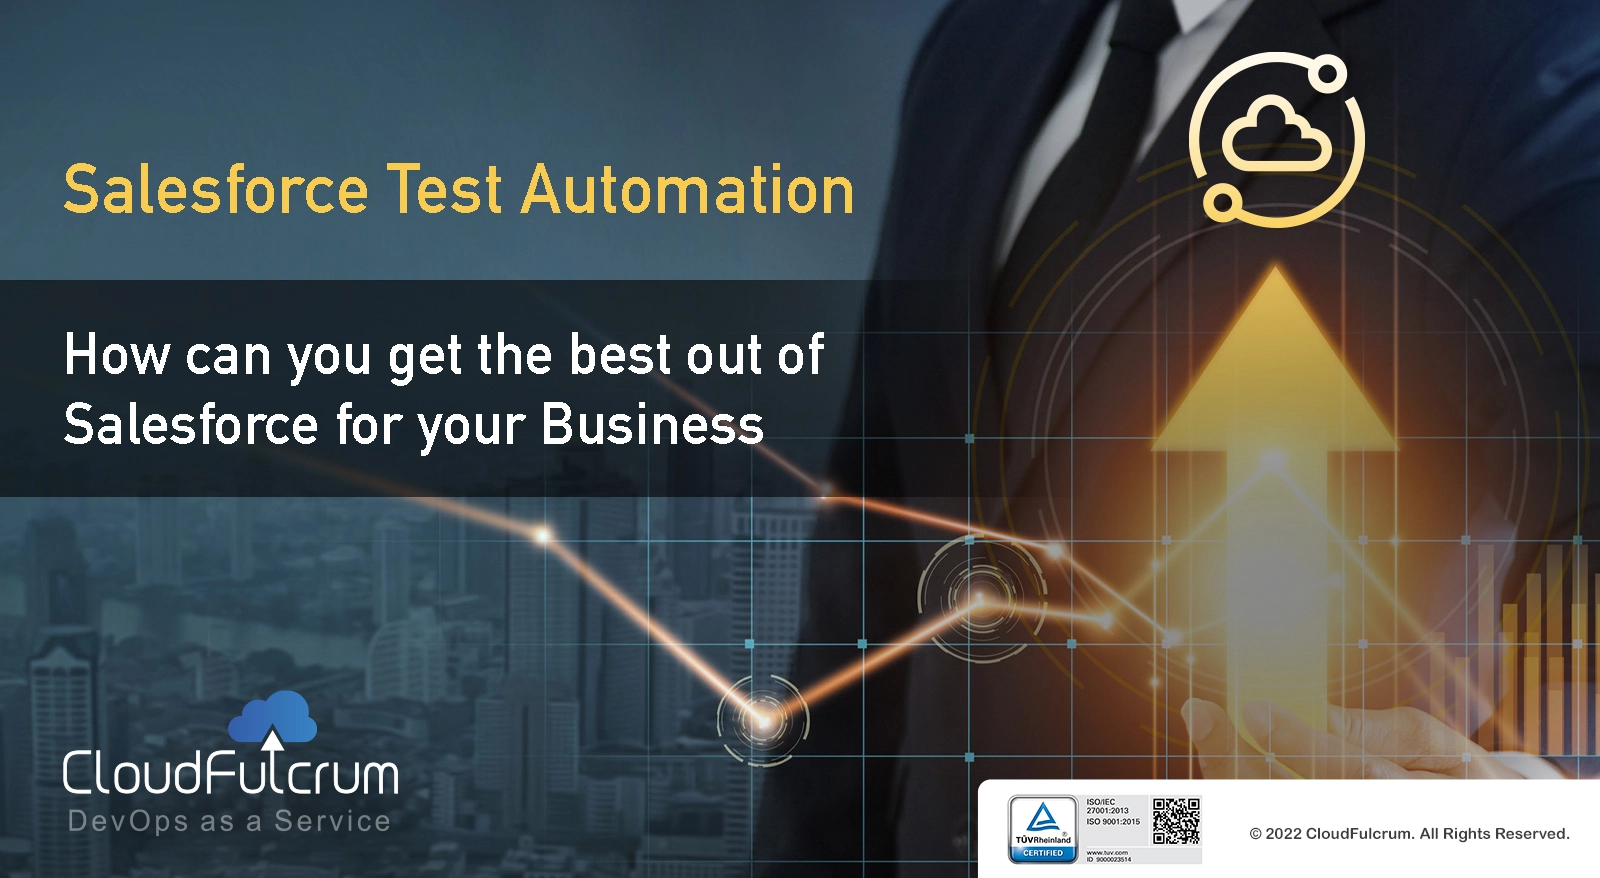 Salesforce Test Automation - How Can you Get the Best Out of Salesforce for Your Business